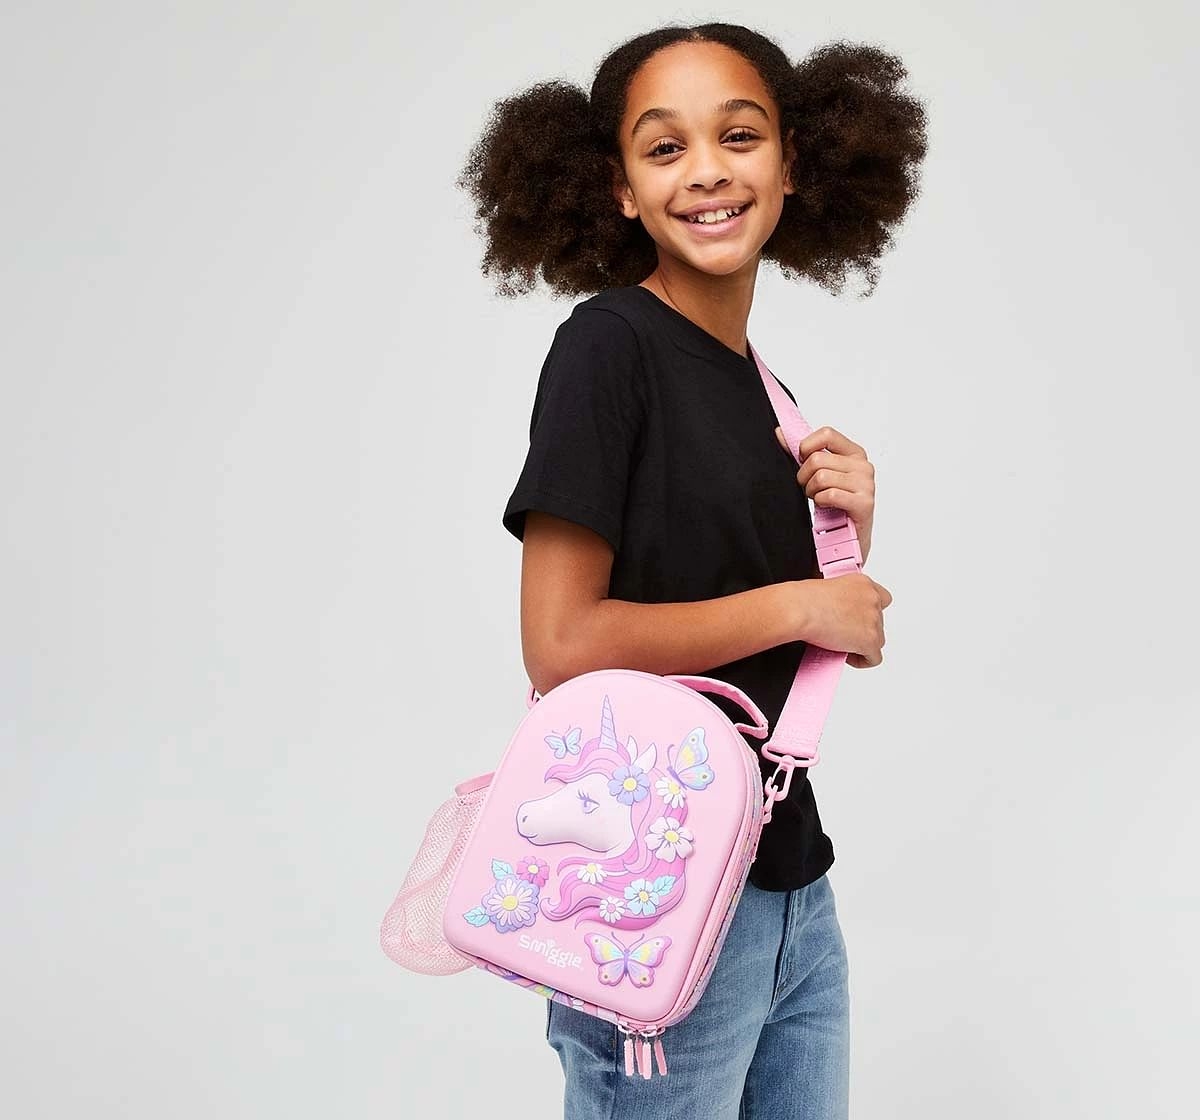 Smiggle Hey There Collection Lunchbag Hardtop Pink, 4Y+